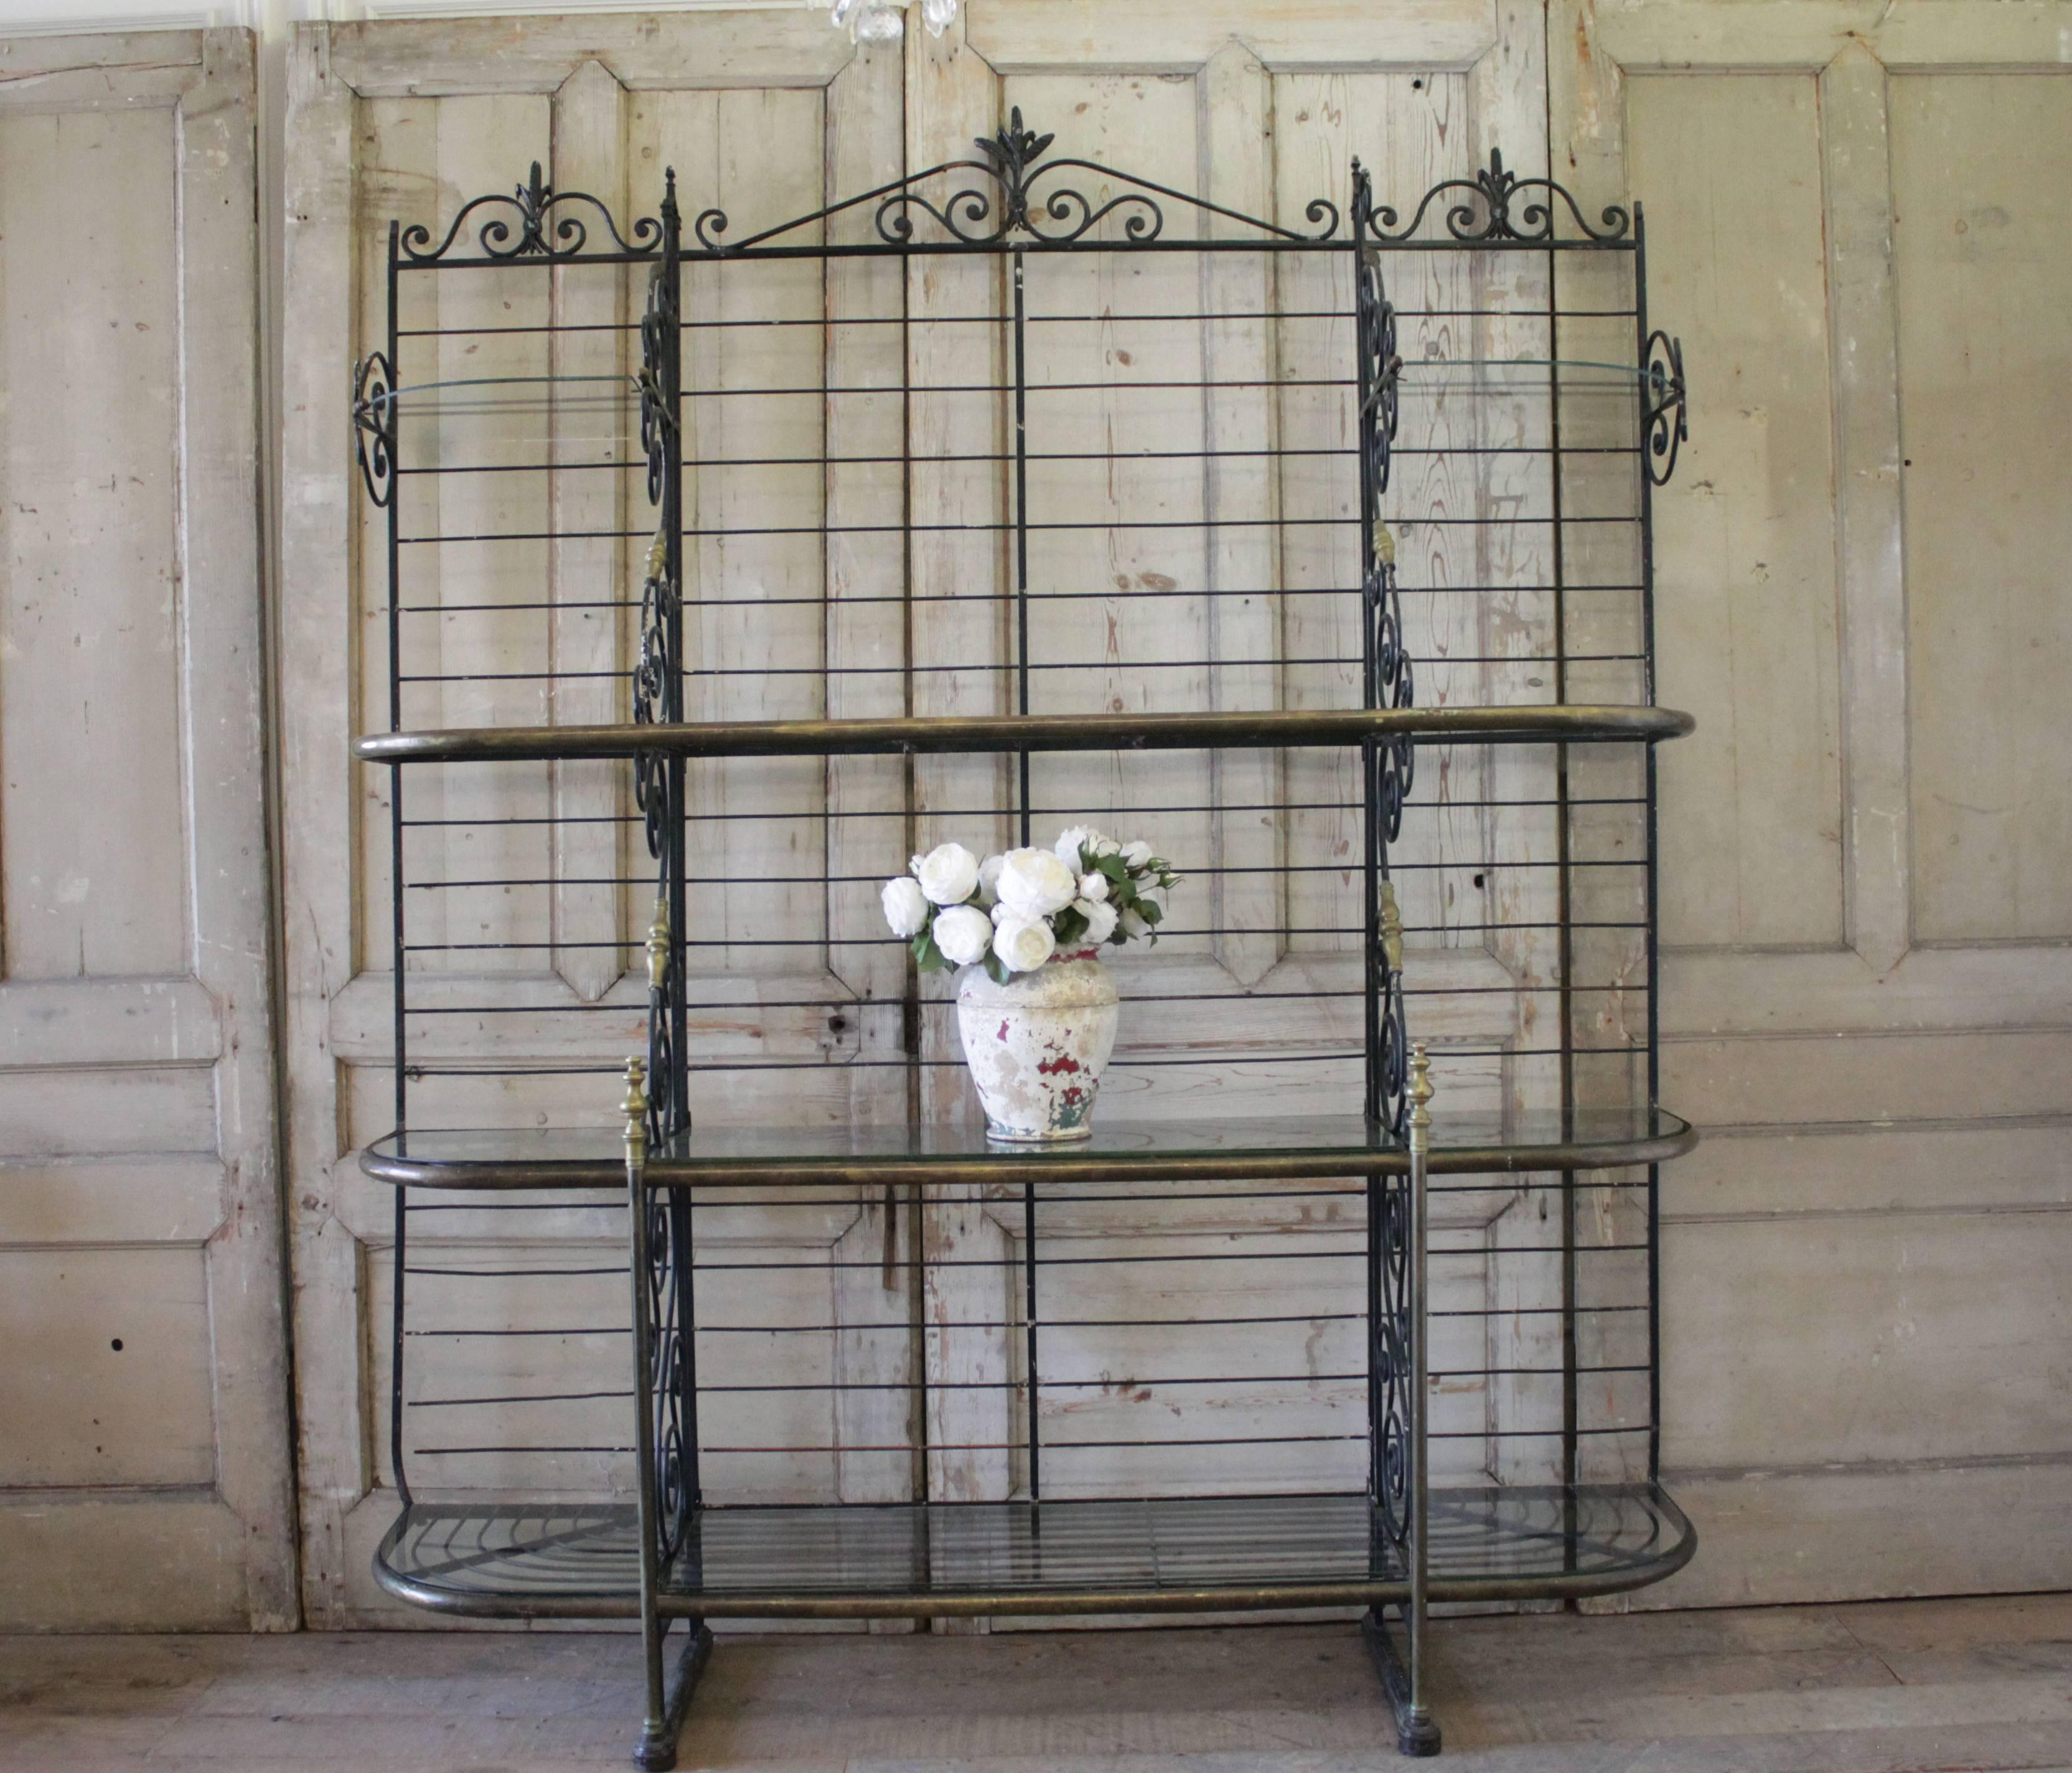 Early 20th century French bakers rack by Perfit Fils Ltd., Paris, France. Item features a heavy scrolling wrought iron and polished brass frame, numerous shelves with iron supports with the makers mark found on the lower iron support. This large